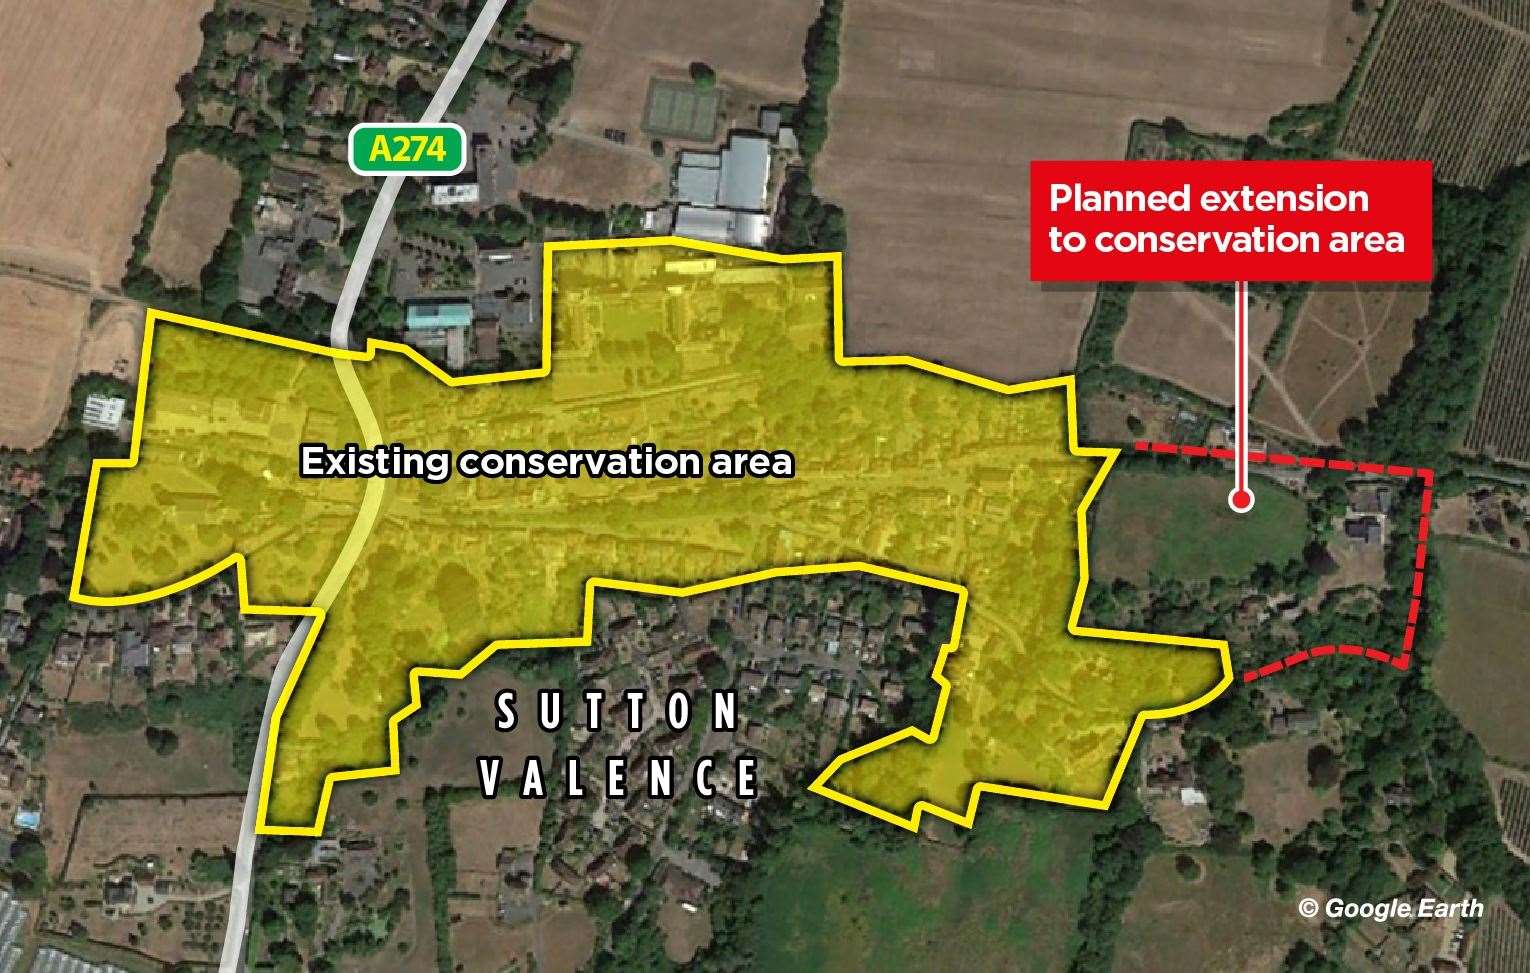 The conservation area and its proposed extension